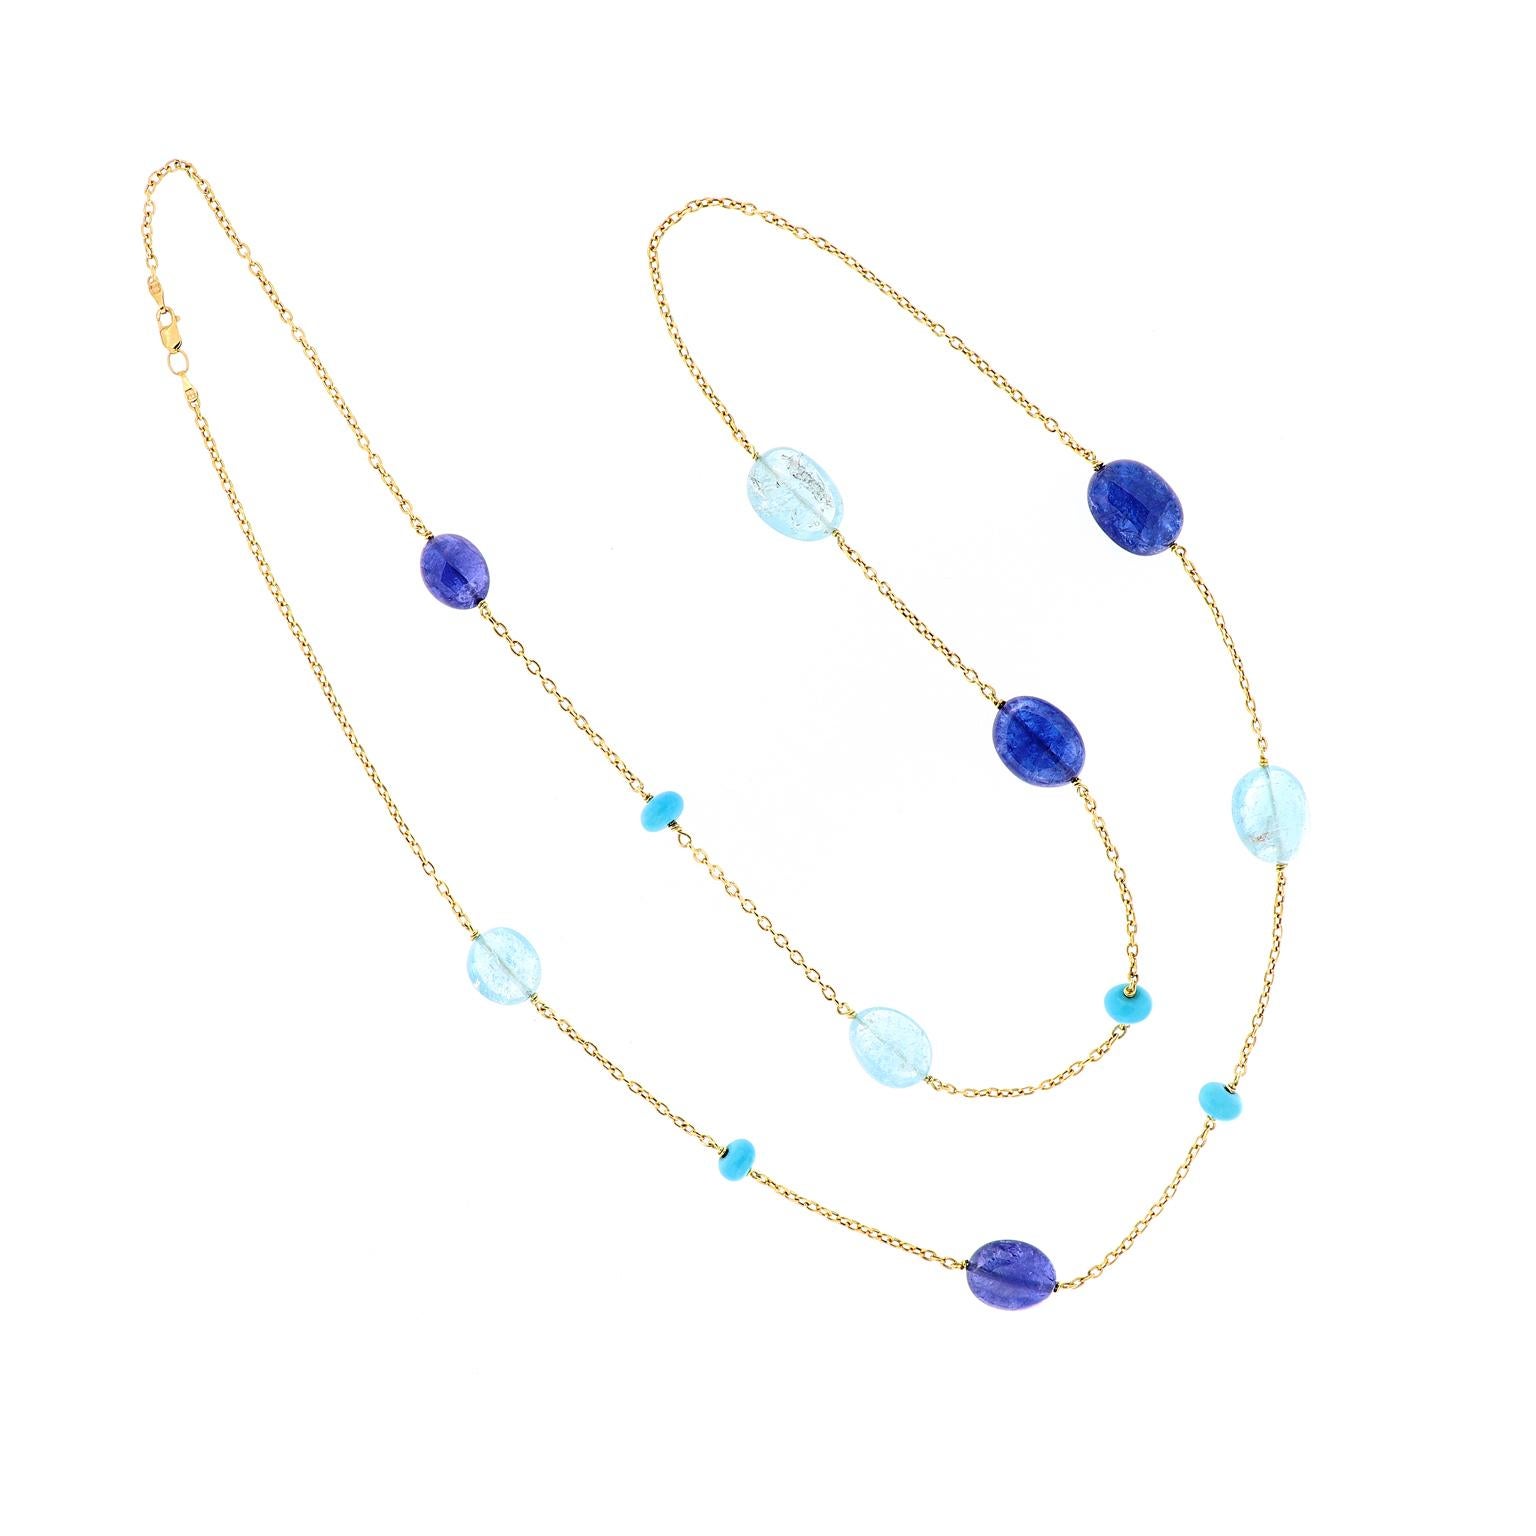 A pretty combination of a blues! The necklace features alternating tumbled tanzanite and blue topaz and turquoise on a 18 karat yellow gold  36 inch chain. The necklace is from the Gossip Collection designed by Goshwara. Weighs 31.8 grams.